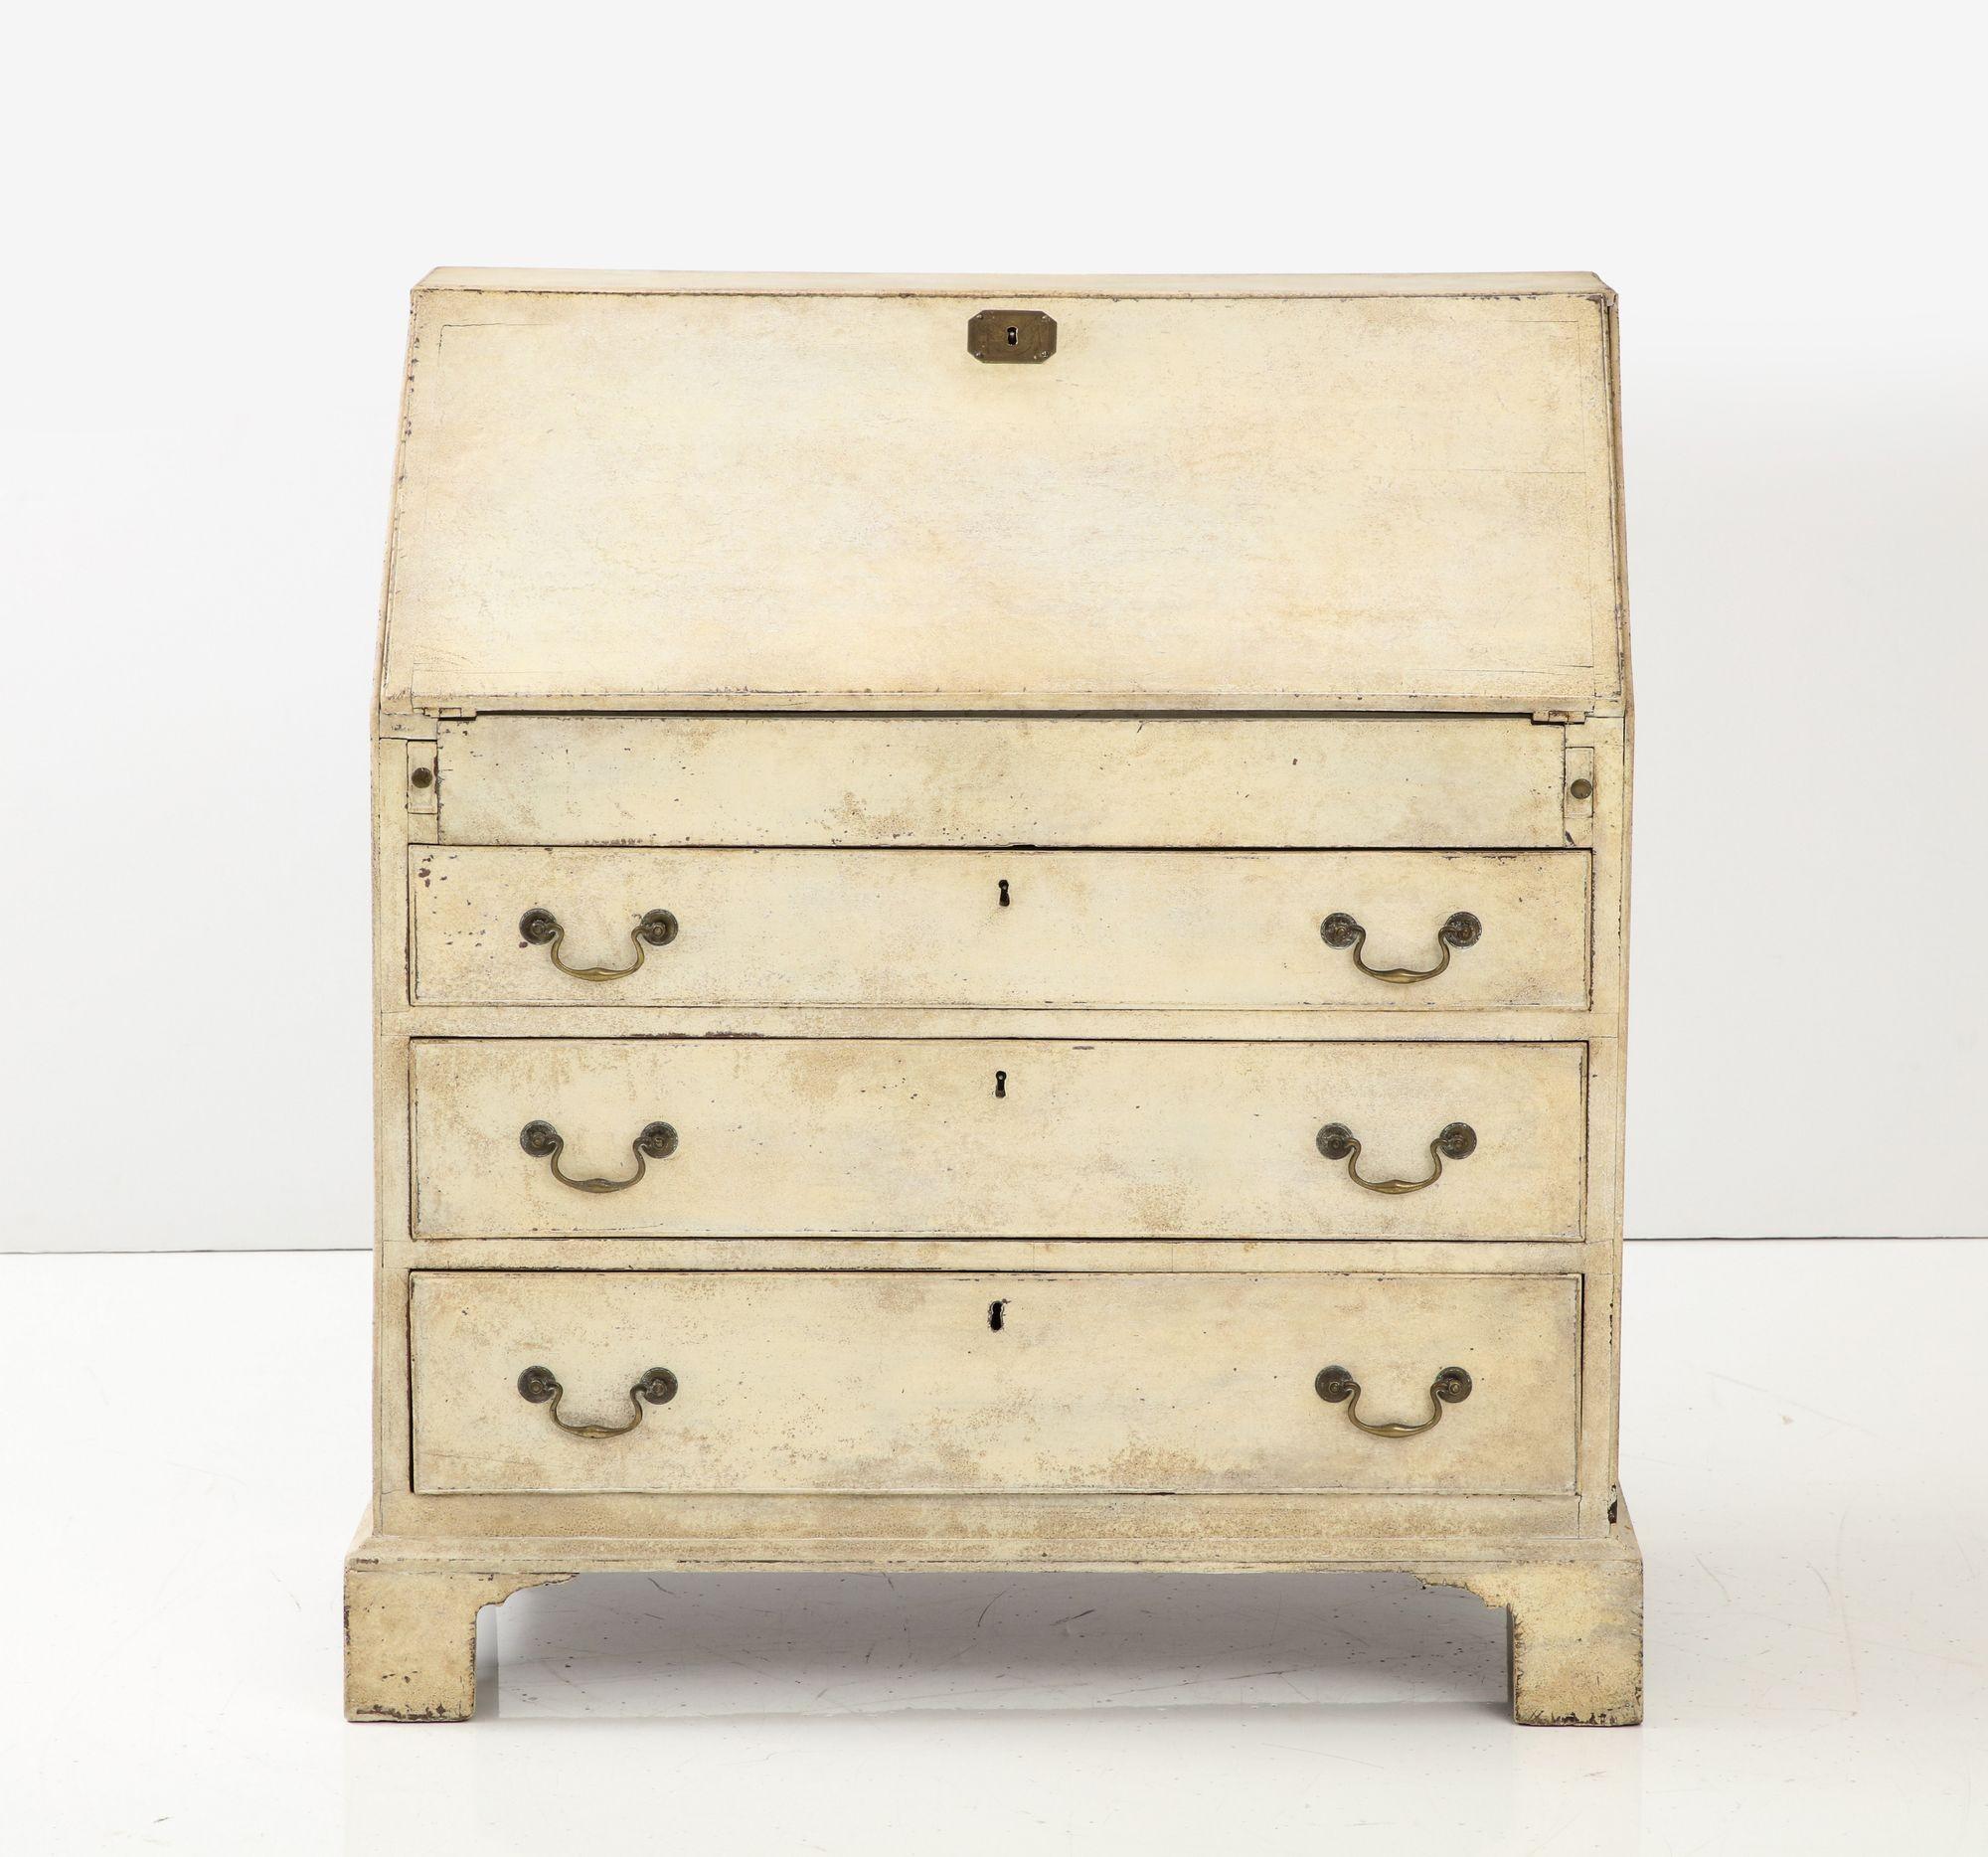 This late 19th-century French secretary exudes timeless elegance with its creamy painted finish. Its writing surface boasts a faux marble pattern, a lovely feature of French furniture from the era. When opened, the secretary reveals a functional